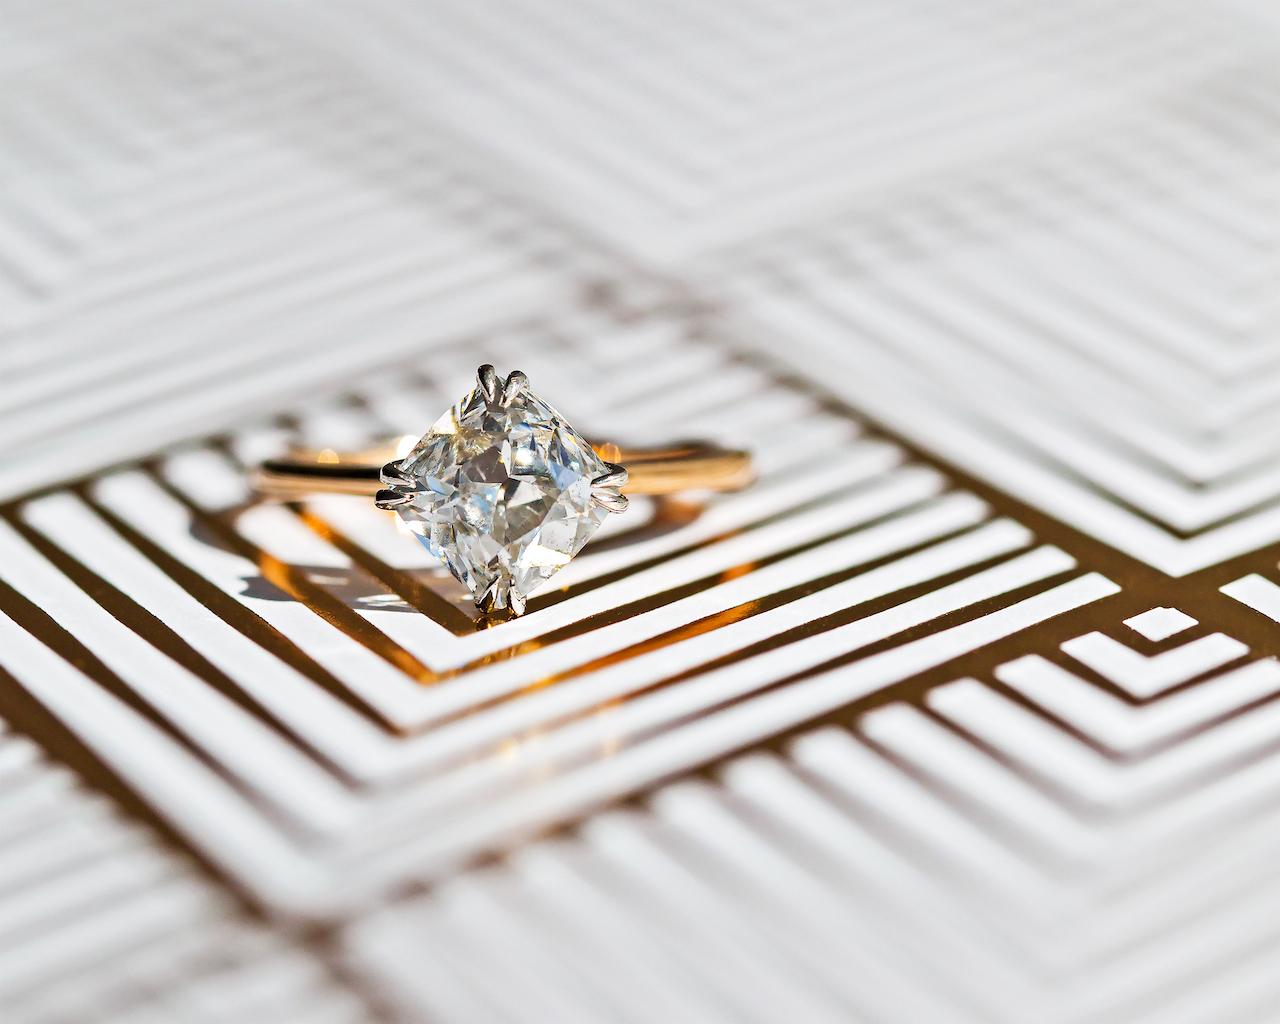 This is a wonderfully unique and newly-made solitaire engagement ring crafted locally in downtown Los Angeles. The platinum and 18k rose gold ring centers an antique diamond nestled between talon prongs off-set diagonally. The gorgeous stone is